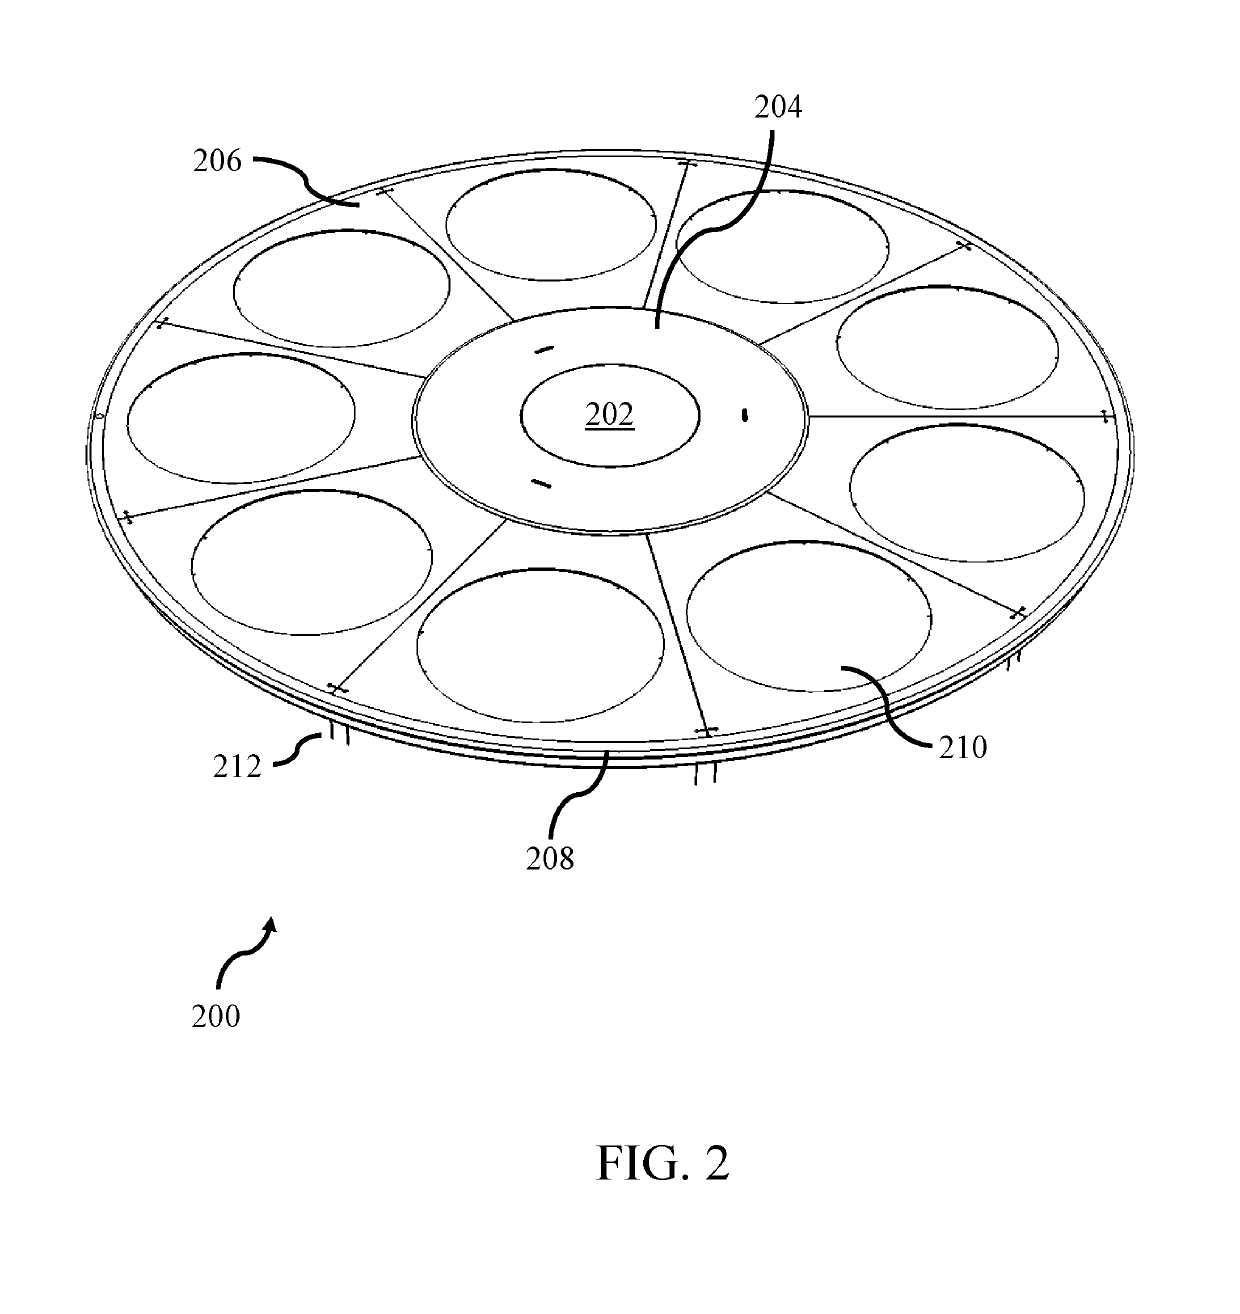 Chemical vapor deposition wafer carrier with thermal cover